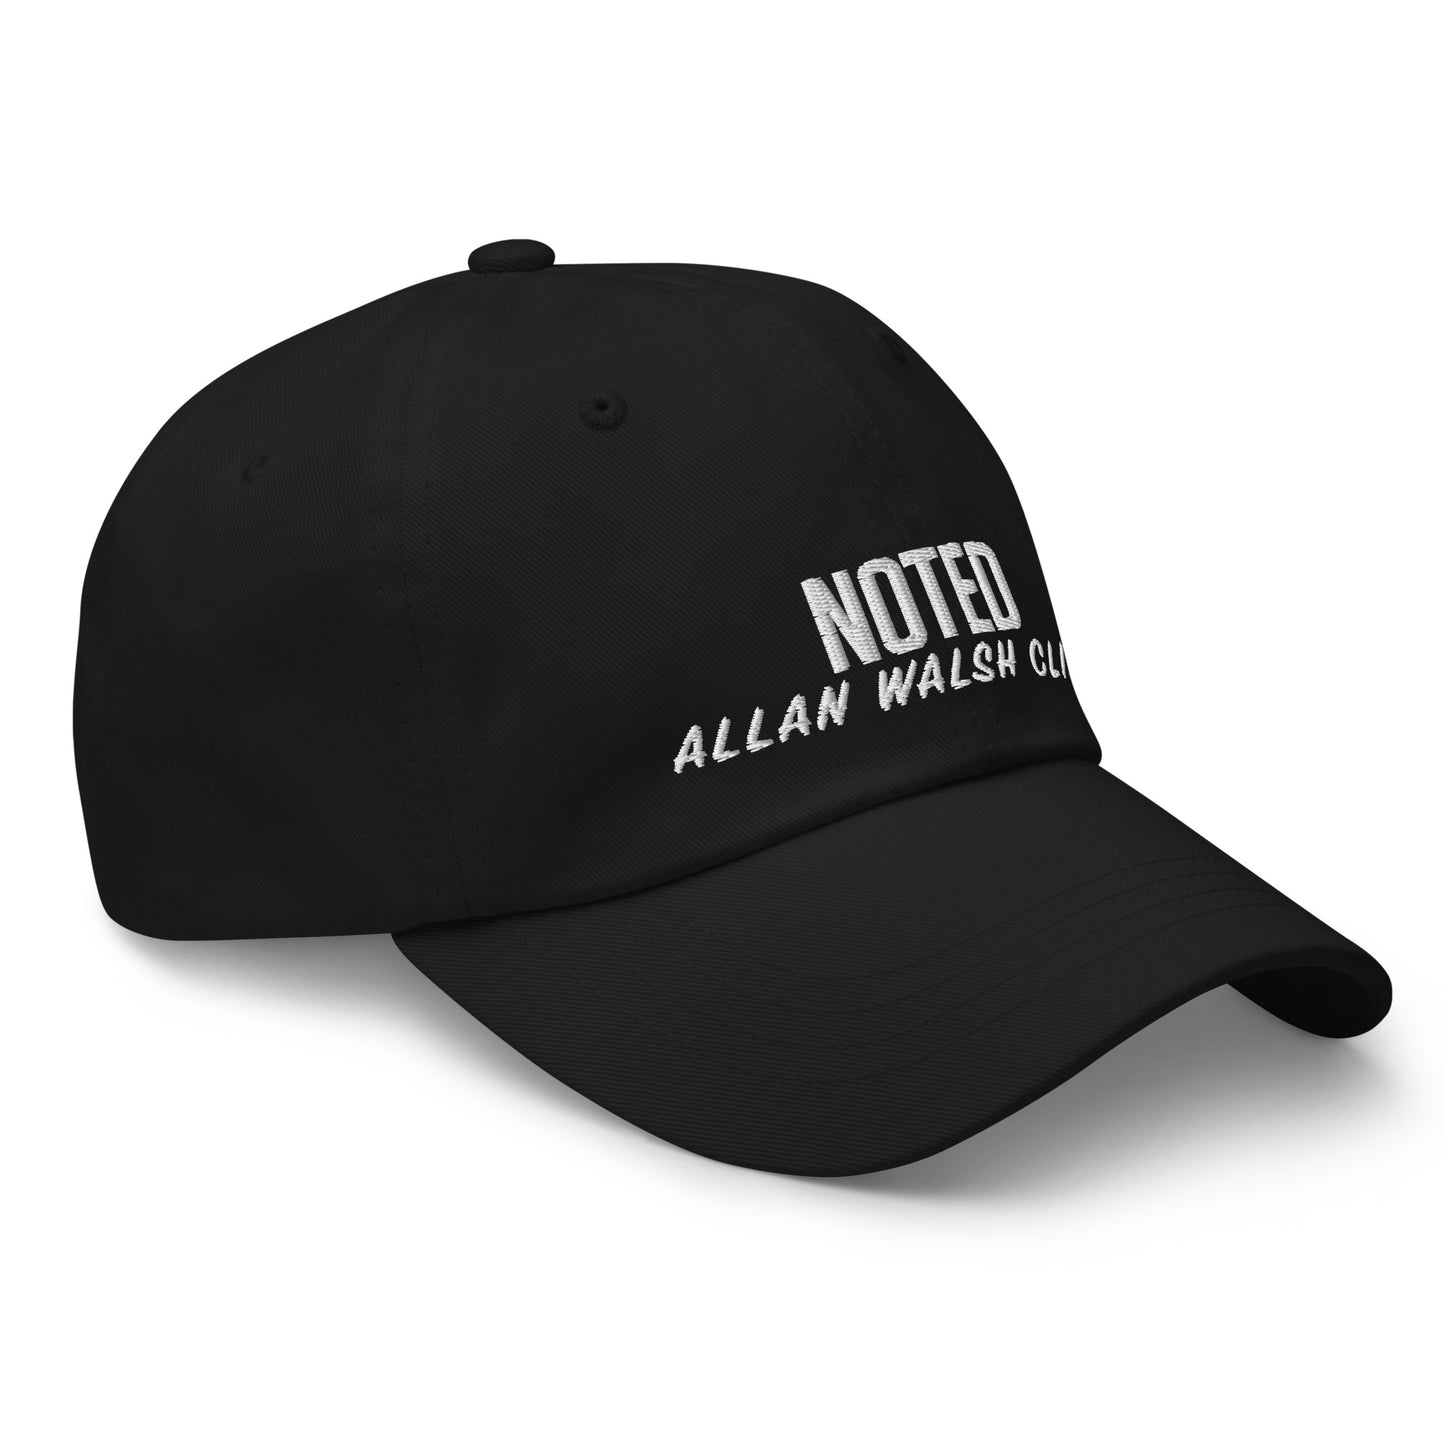 NOTED Allan Walsh Client Hat